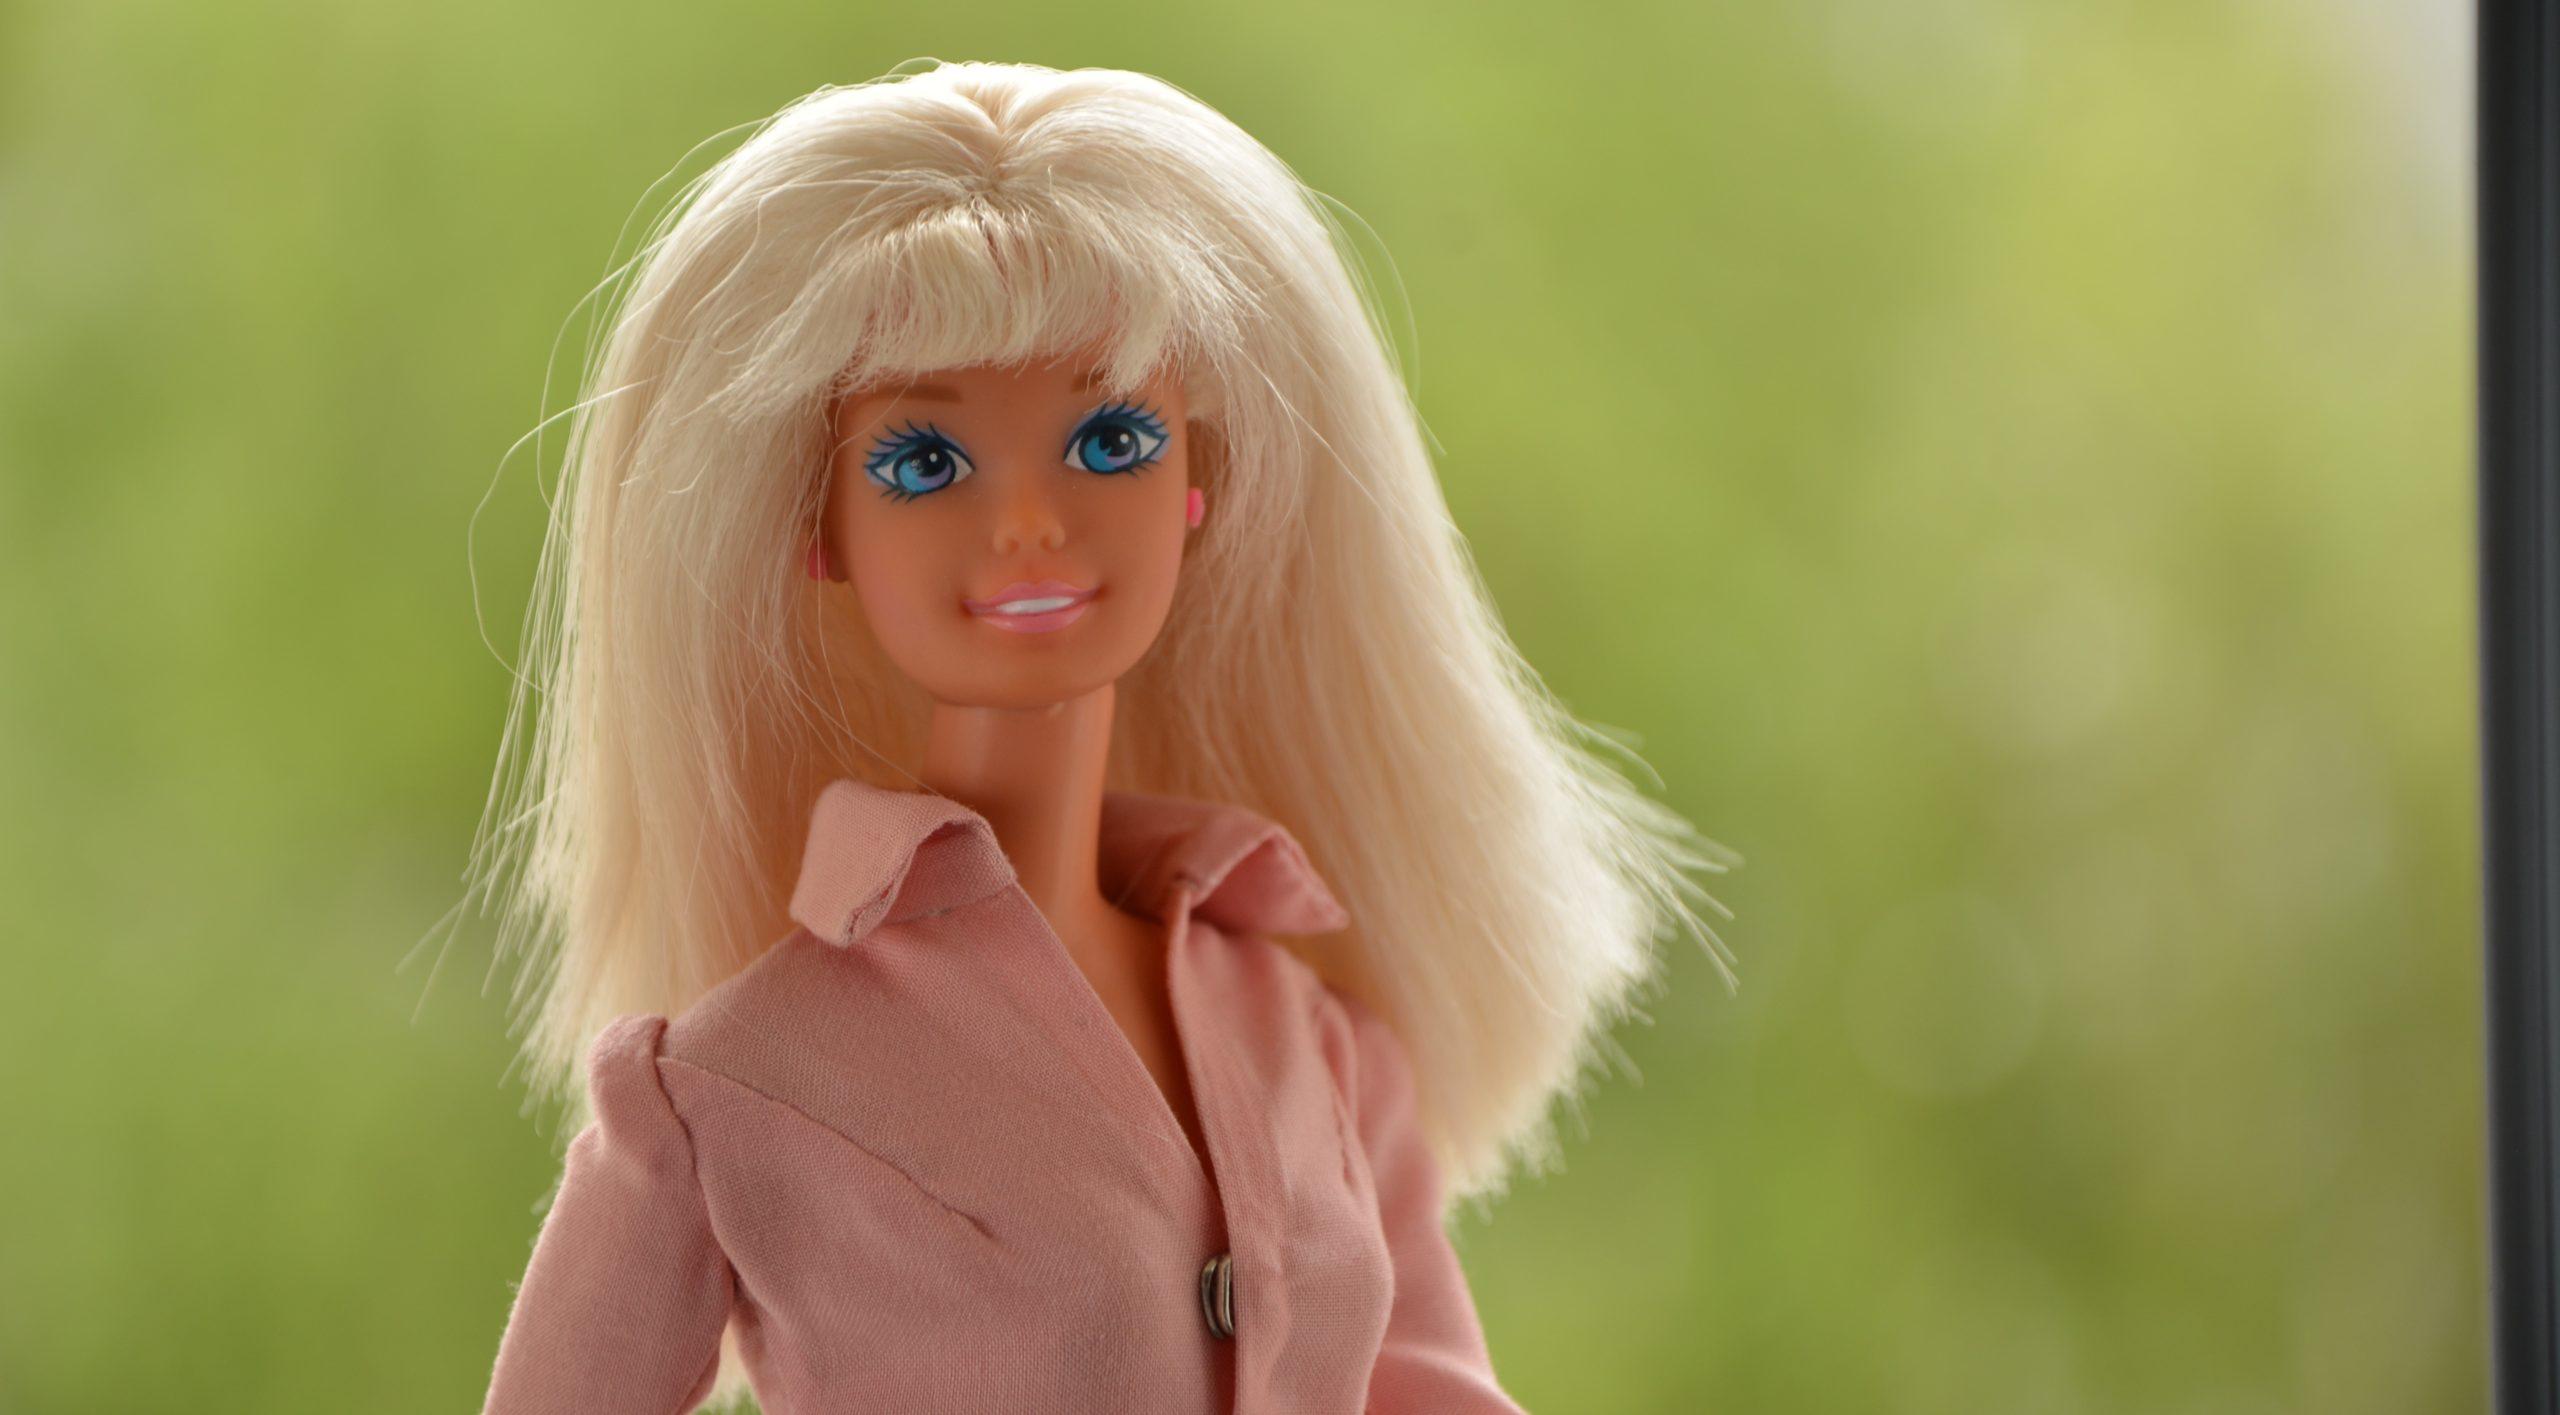 A Barbie doll against a softened, green background.